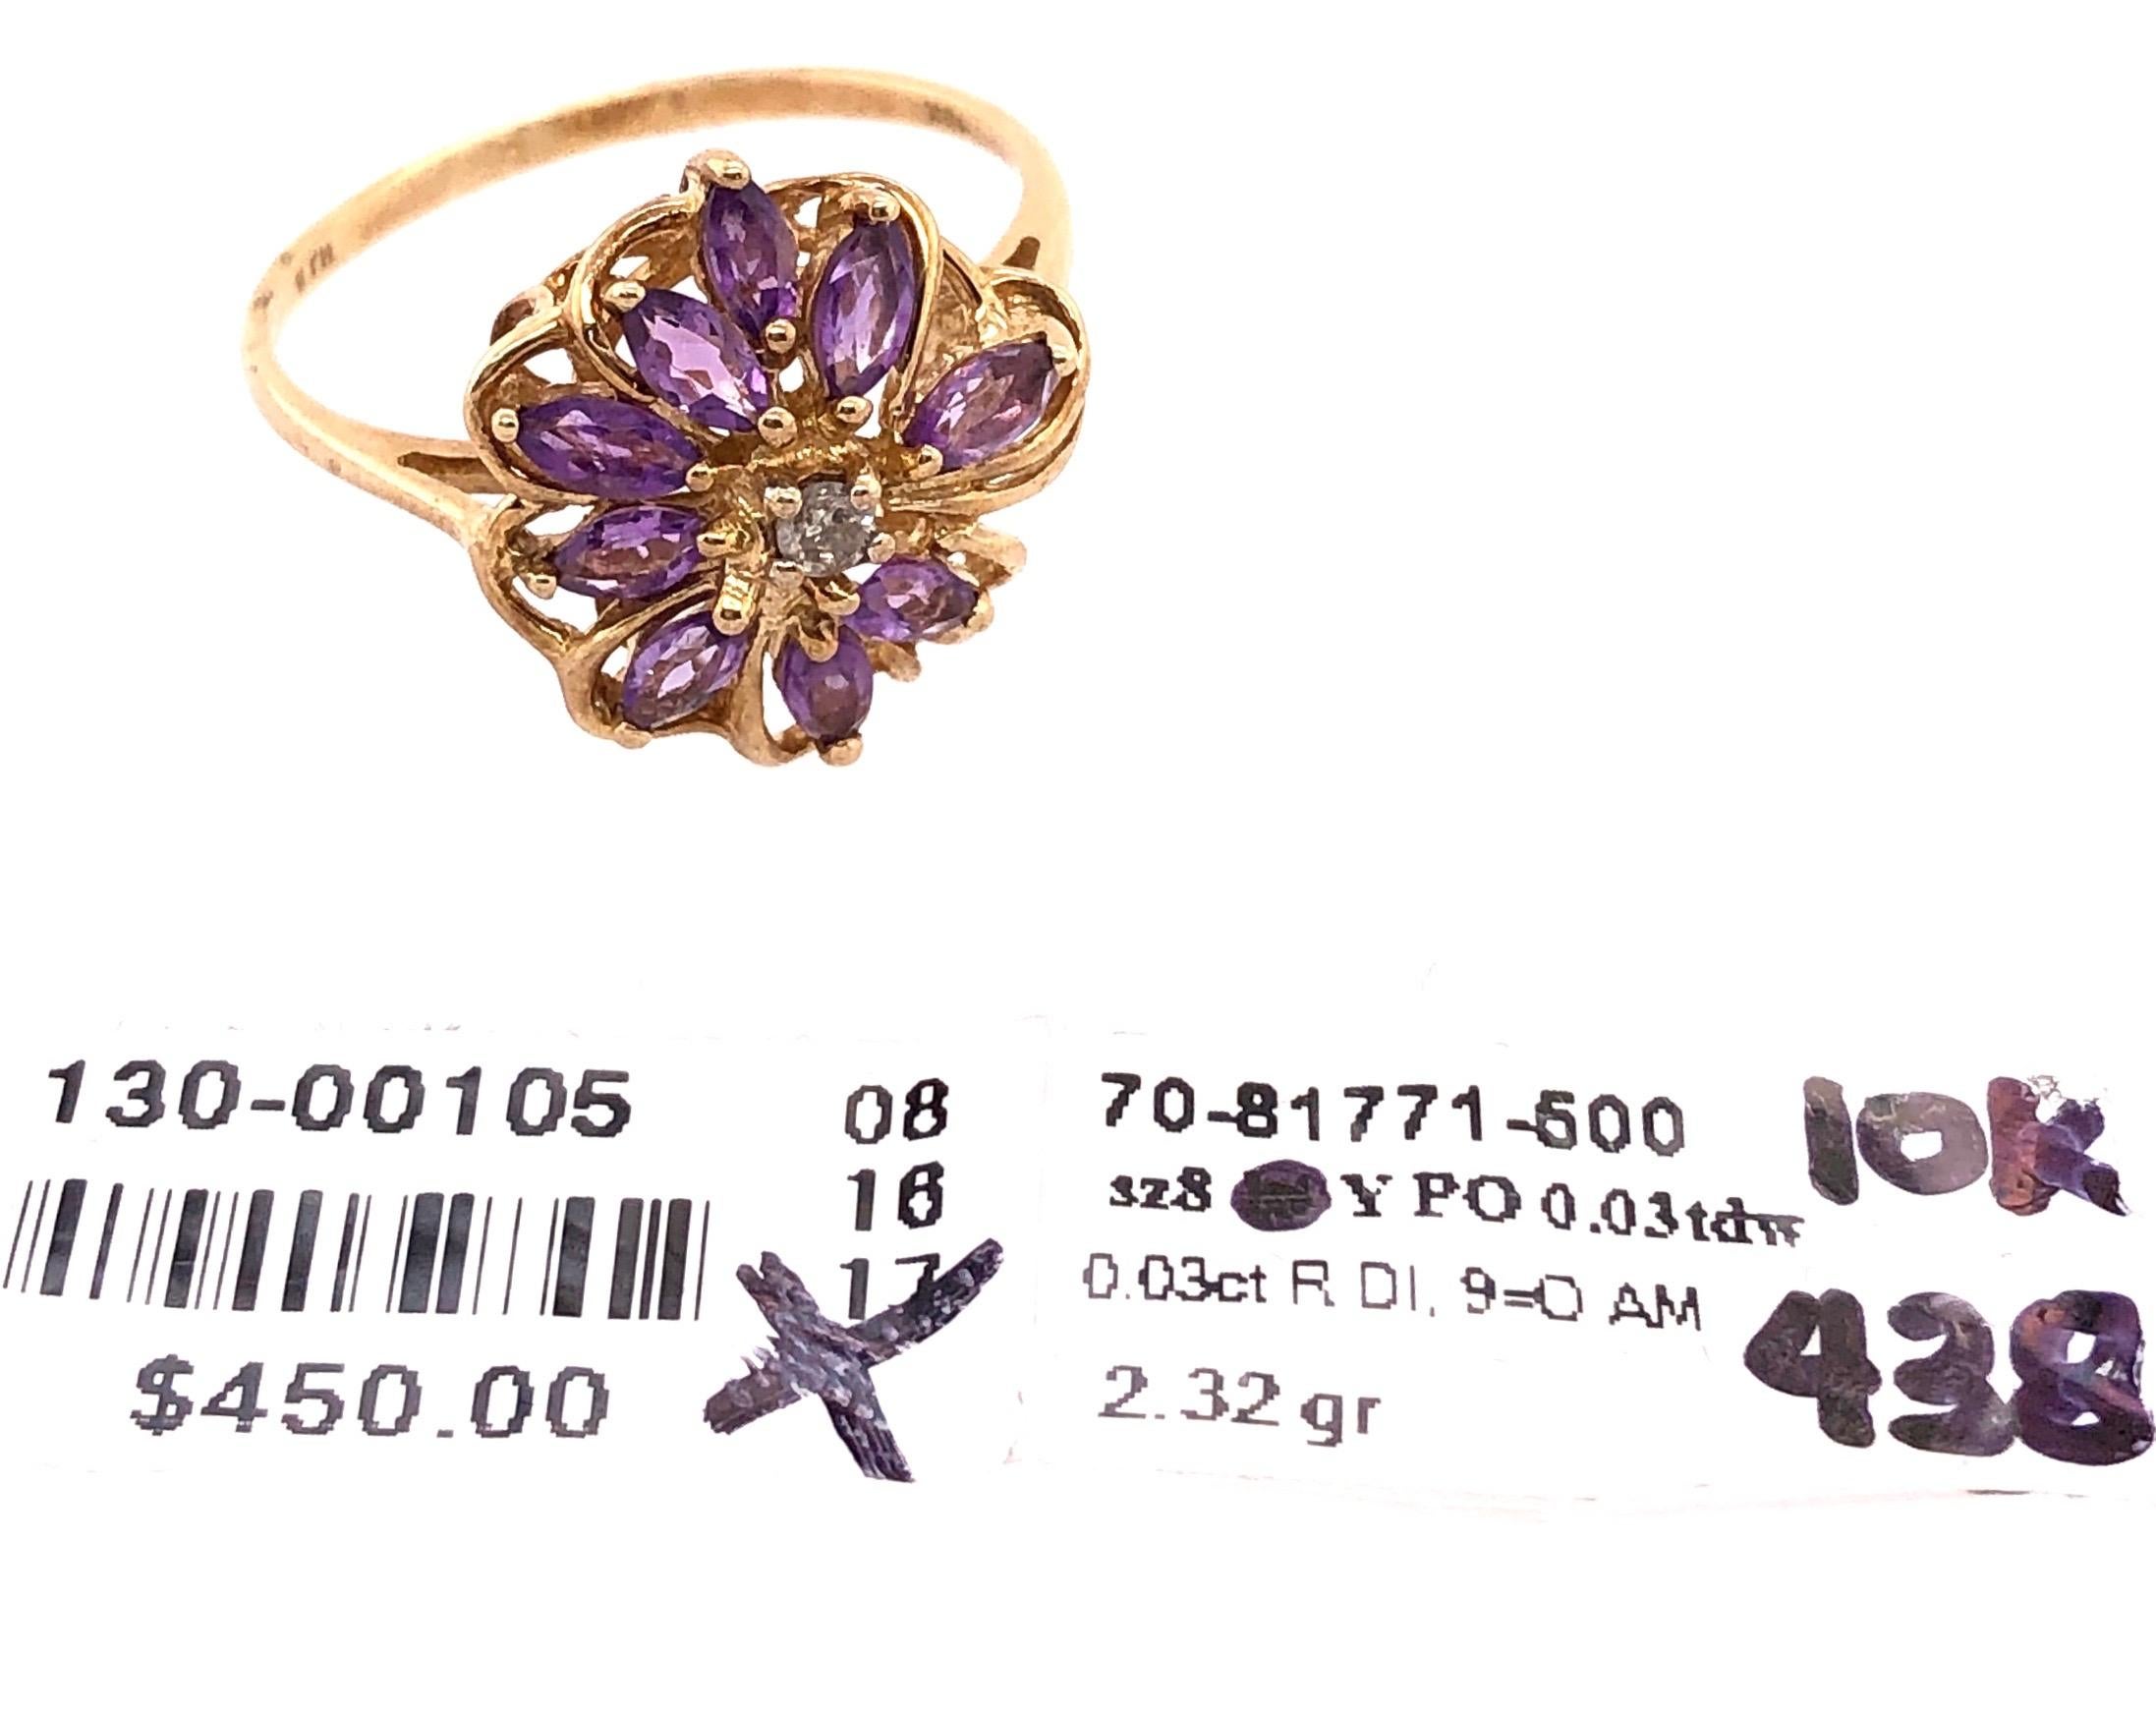 10 Karat Yellow Gold Fashion Oval Amethyst Ring with Round Diamond 0.03 TDW For Sale 1